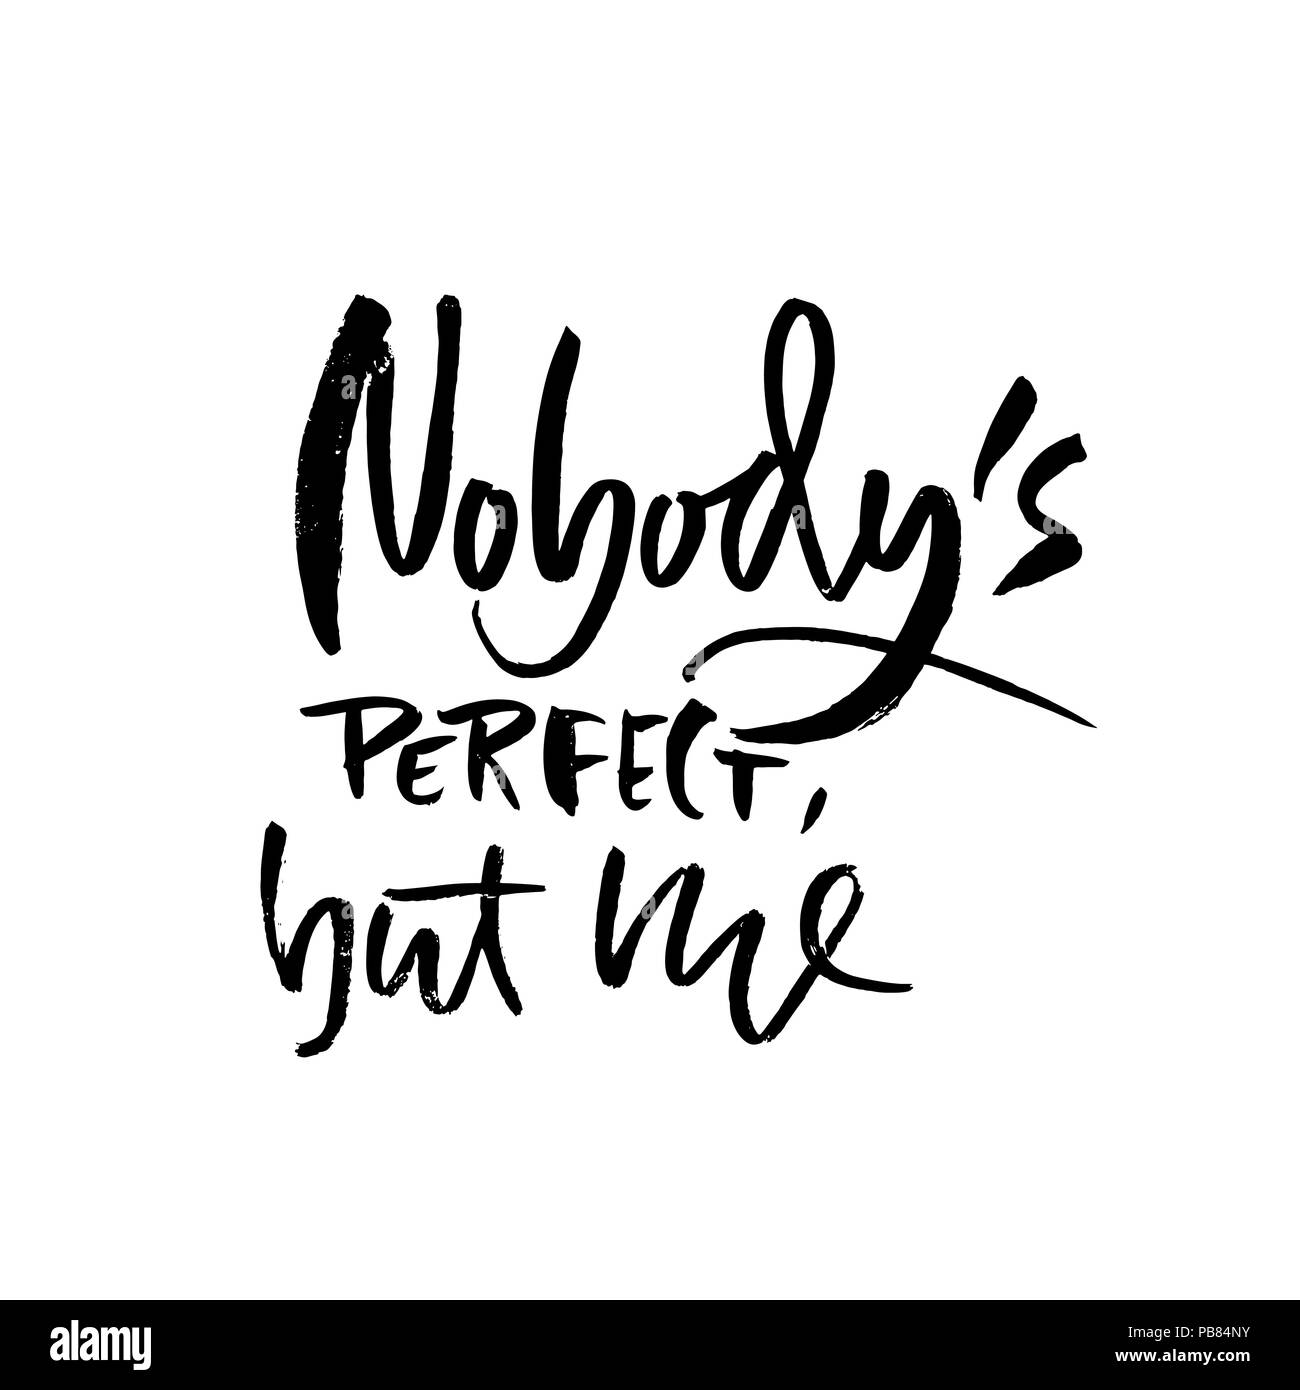 Nobody's perfect but me. Hand drawn dry brush lettering. Ink illustration. Modern calligraphy phrase. Vector illustration. Stock Vector